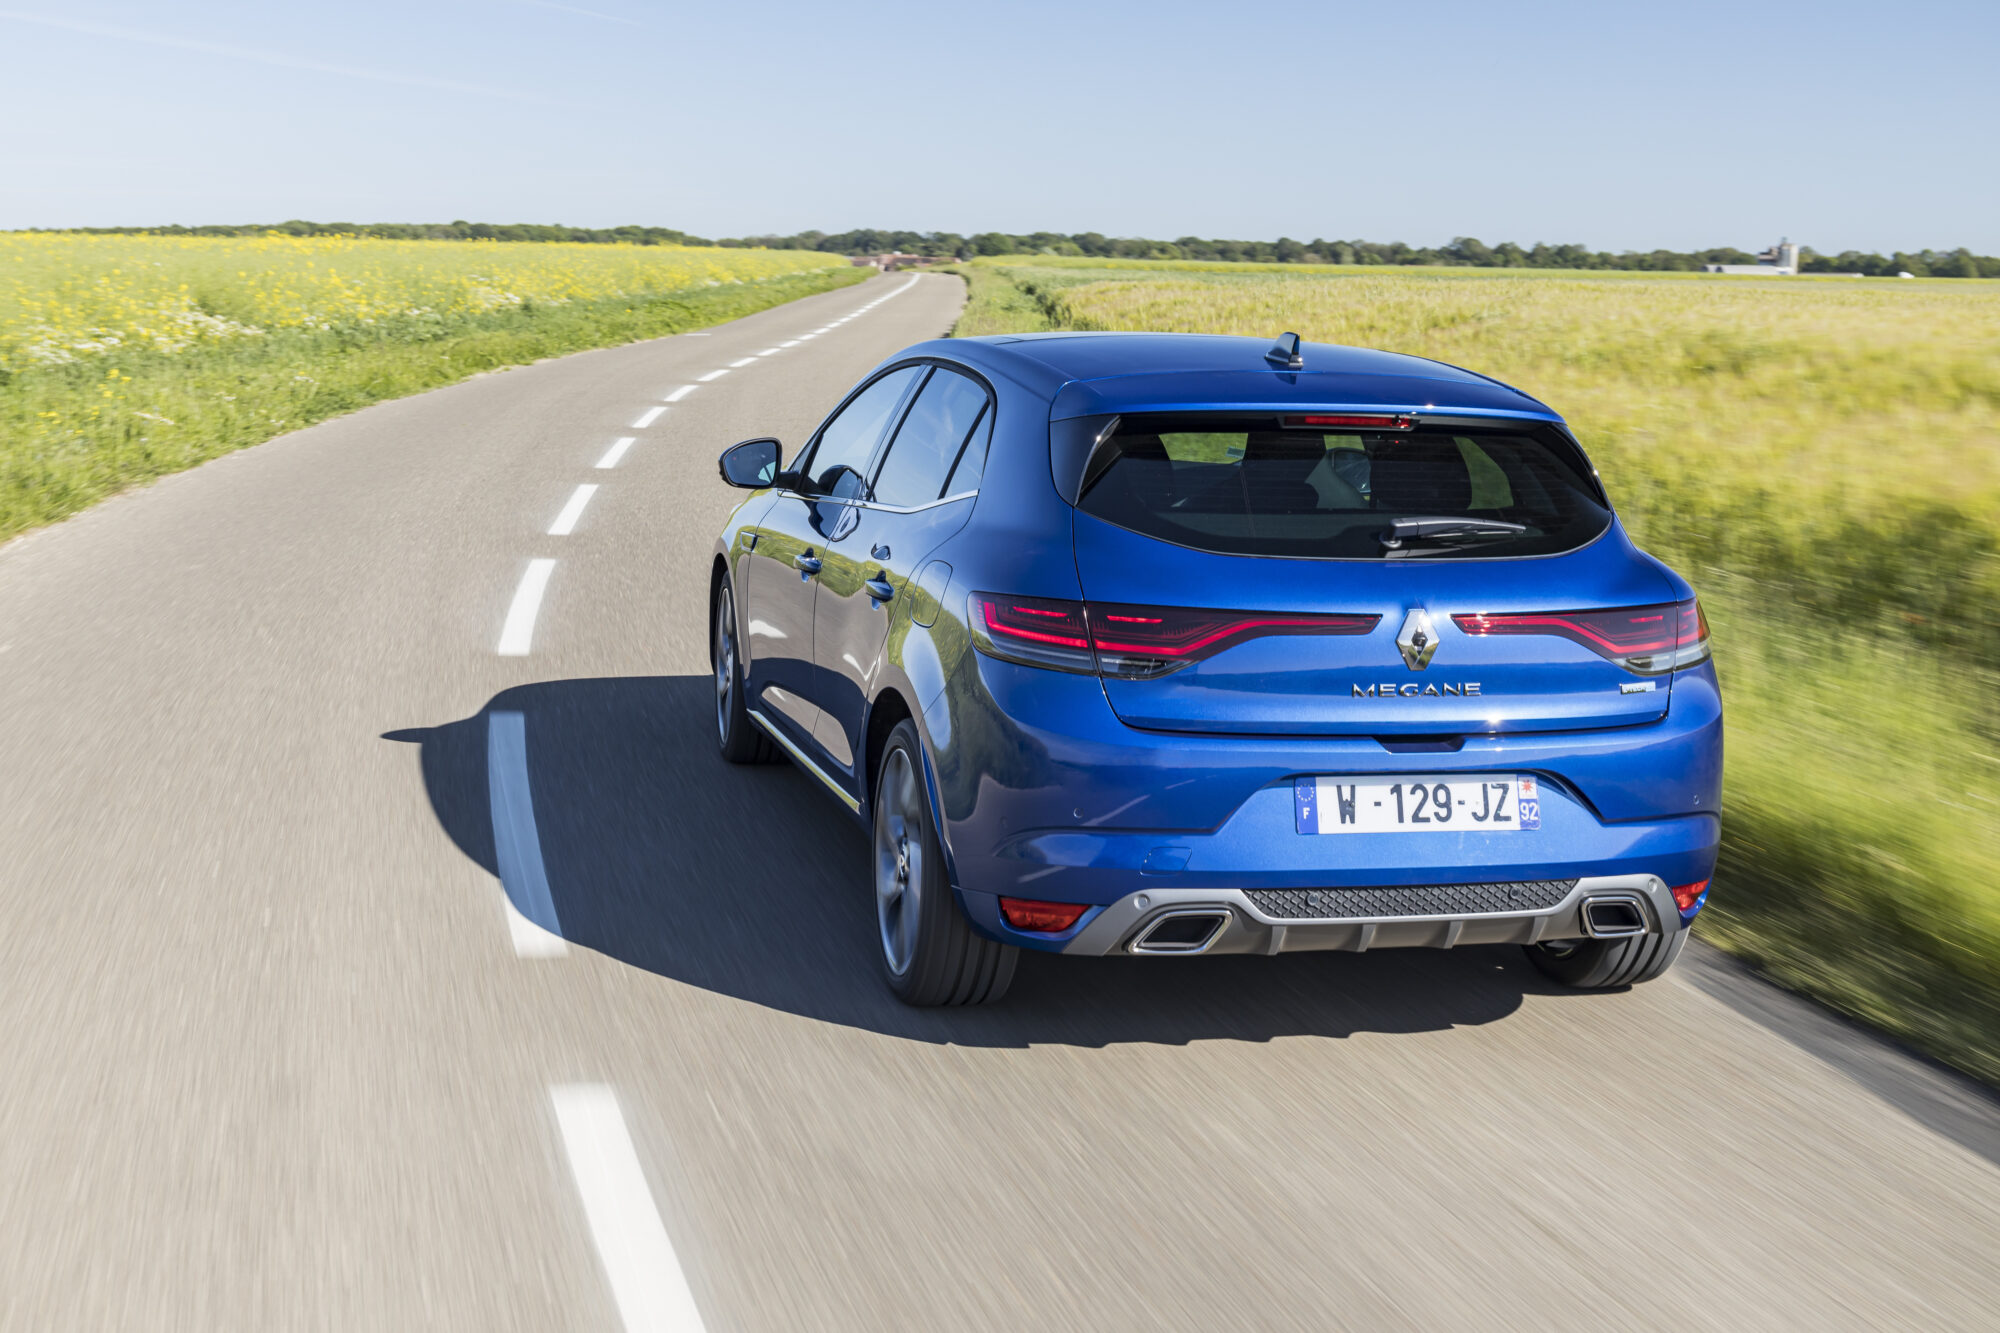 2021 - New Renault Mégane E-TECH Plug-in RS Line test-drives